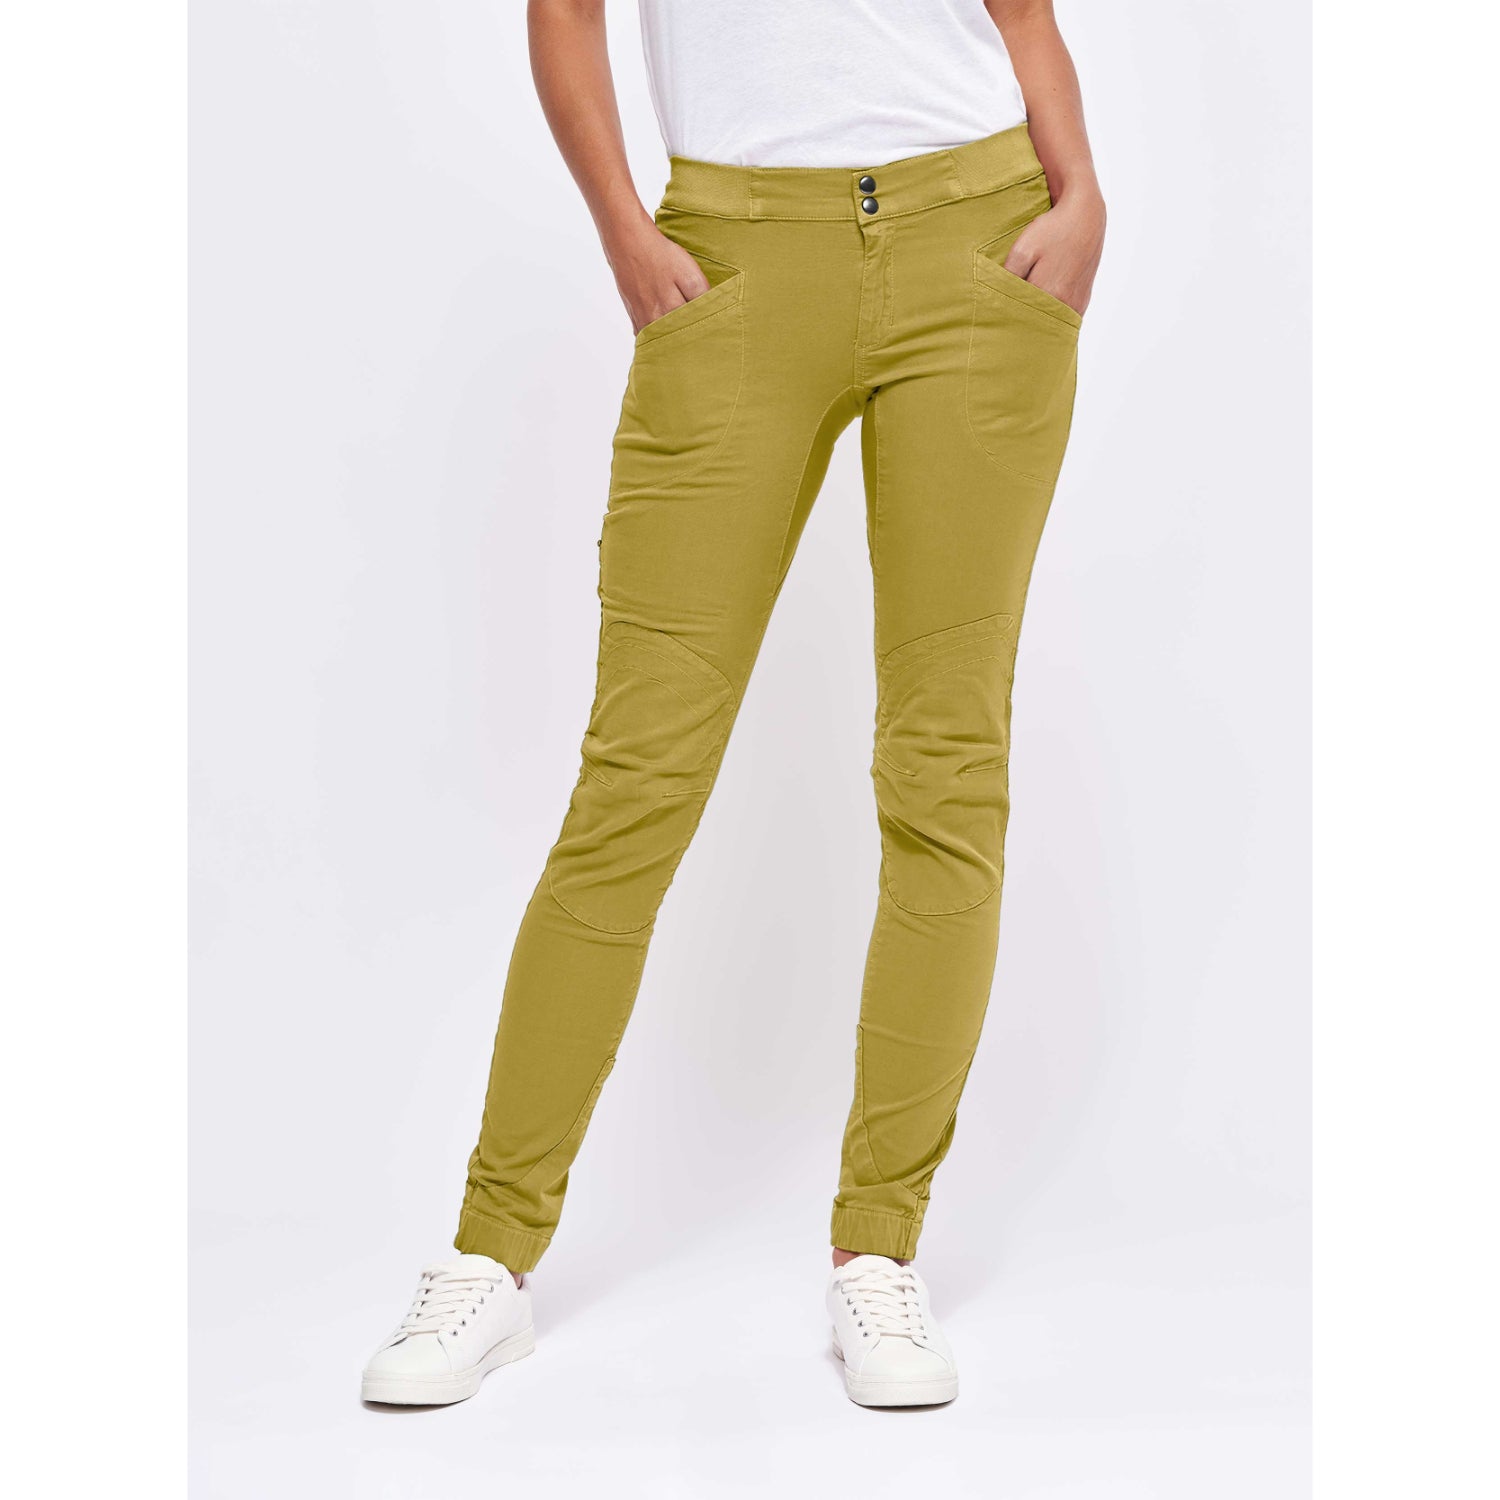 Looking For Wild Laila Peak Pant - Womens (Bamboo)